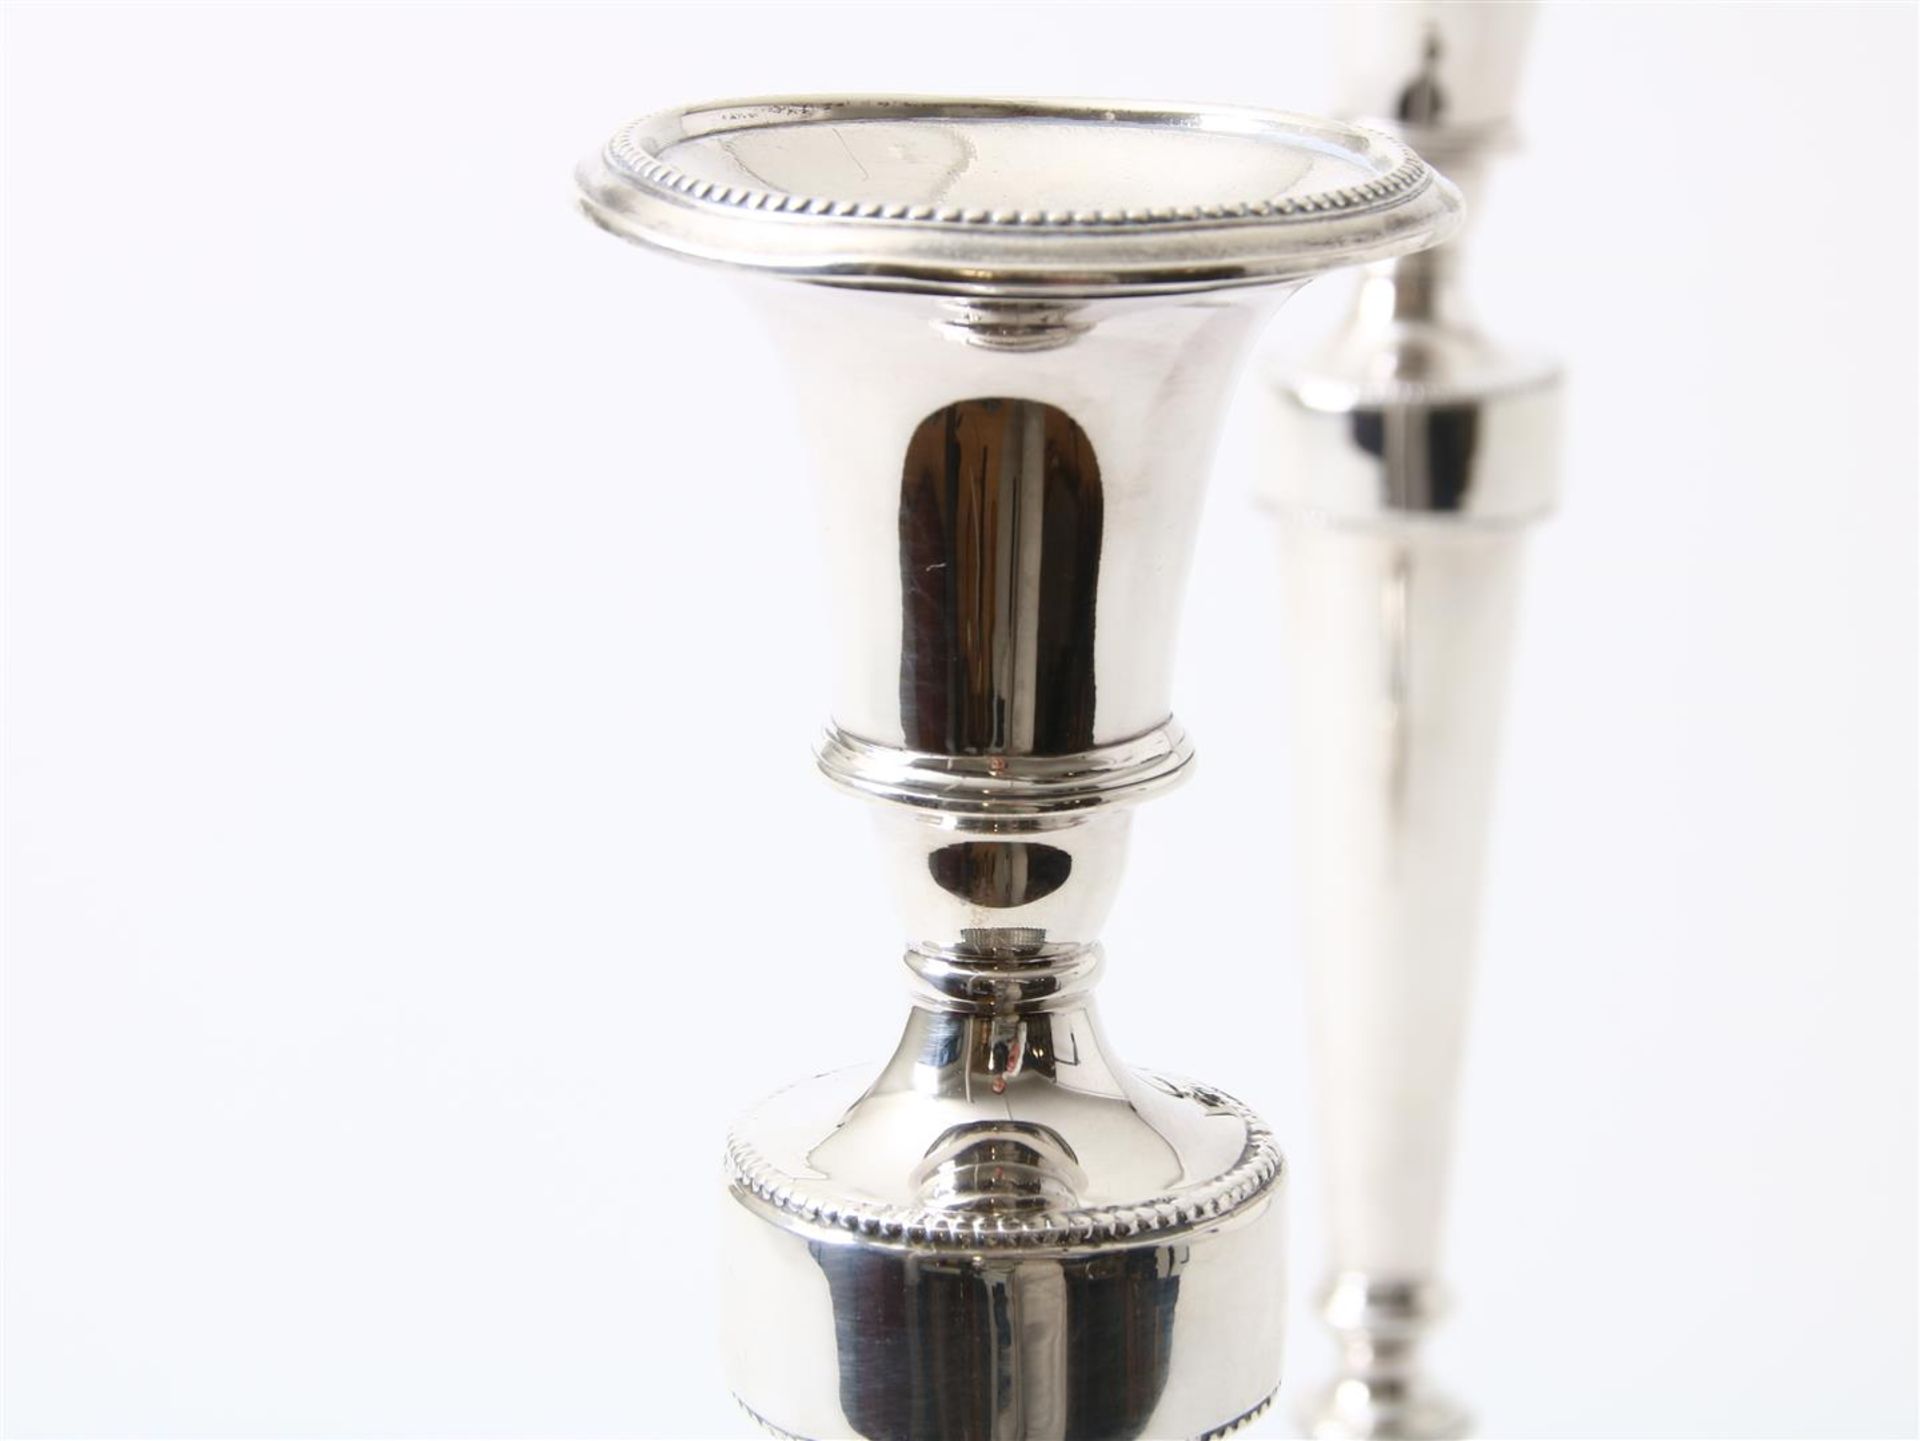 Set of candlesticks, decorated with pearl edge, engraved with monogram, Sheffield, England, maker' - Image 3 of 4